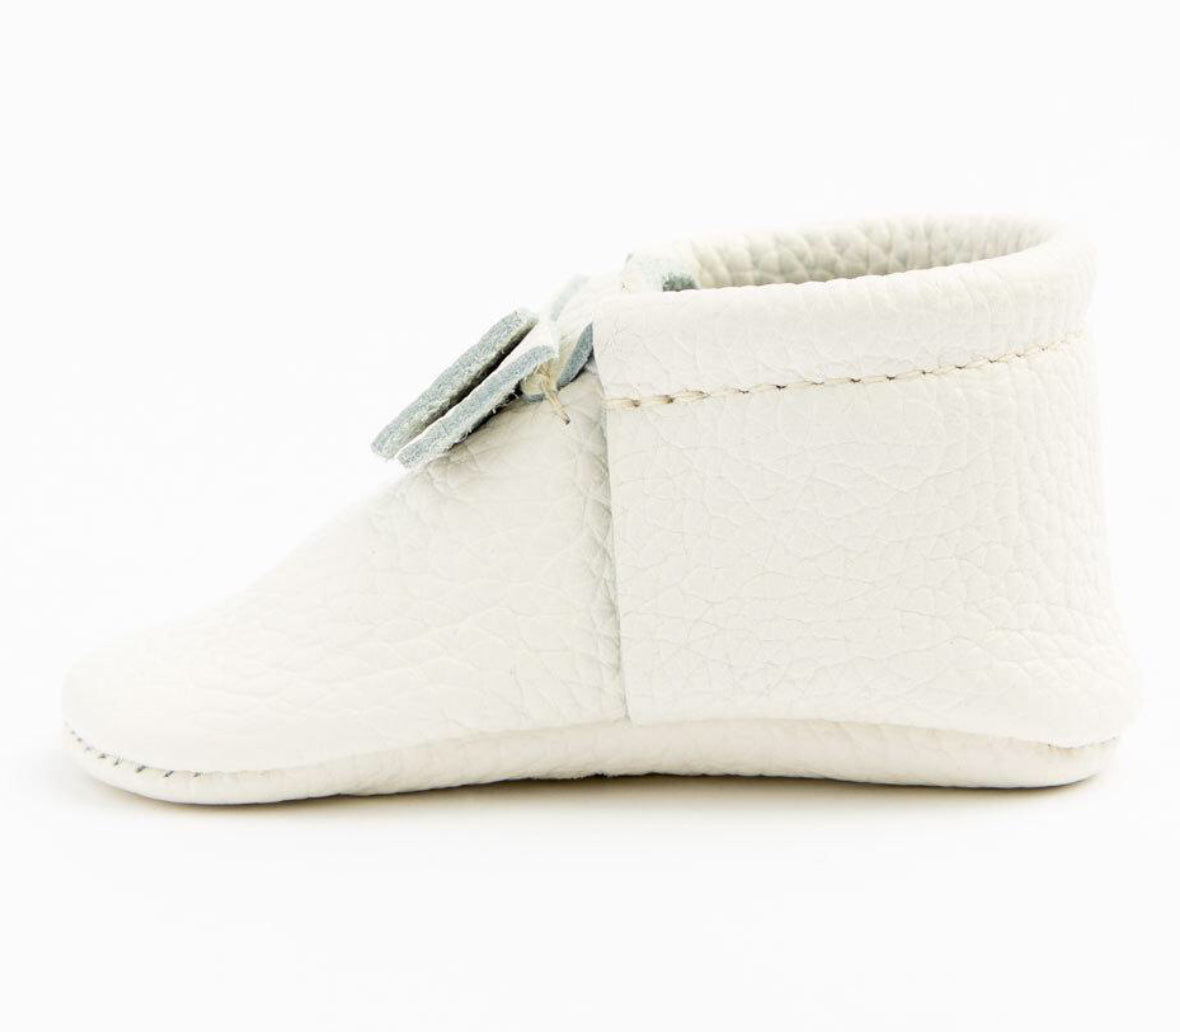 Freshly Picked | First Pair Moccasins